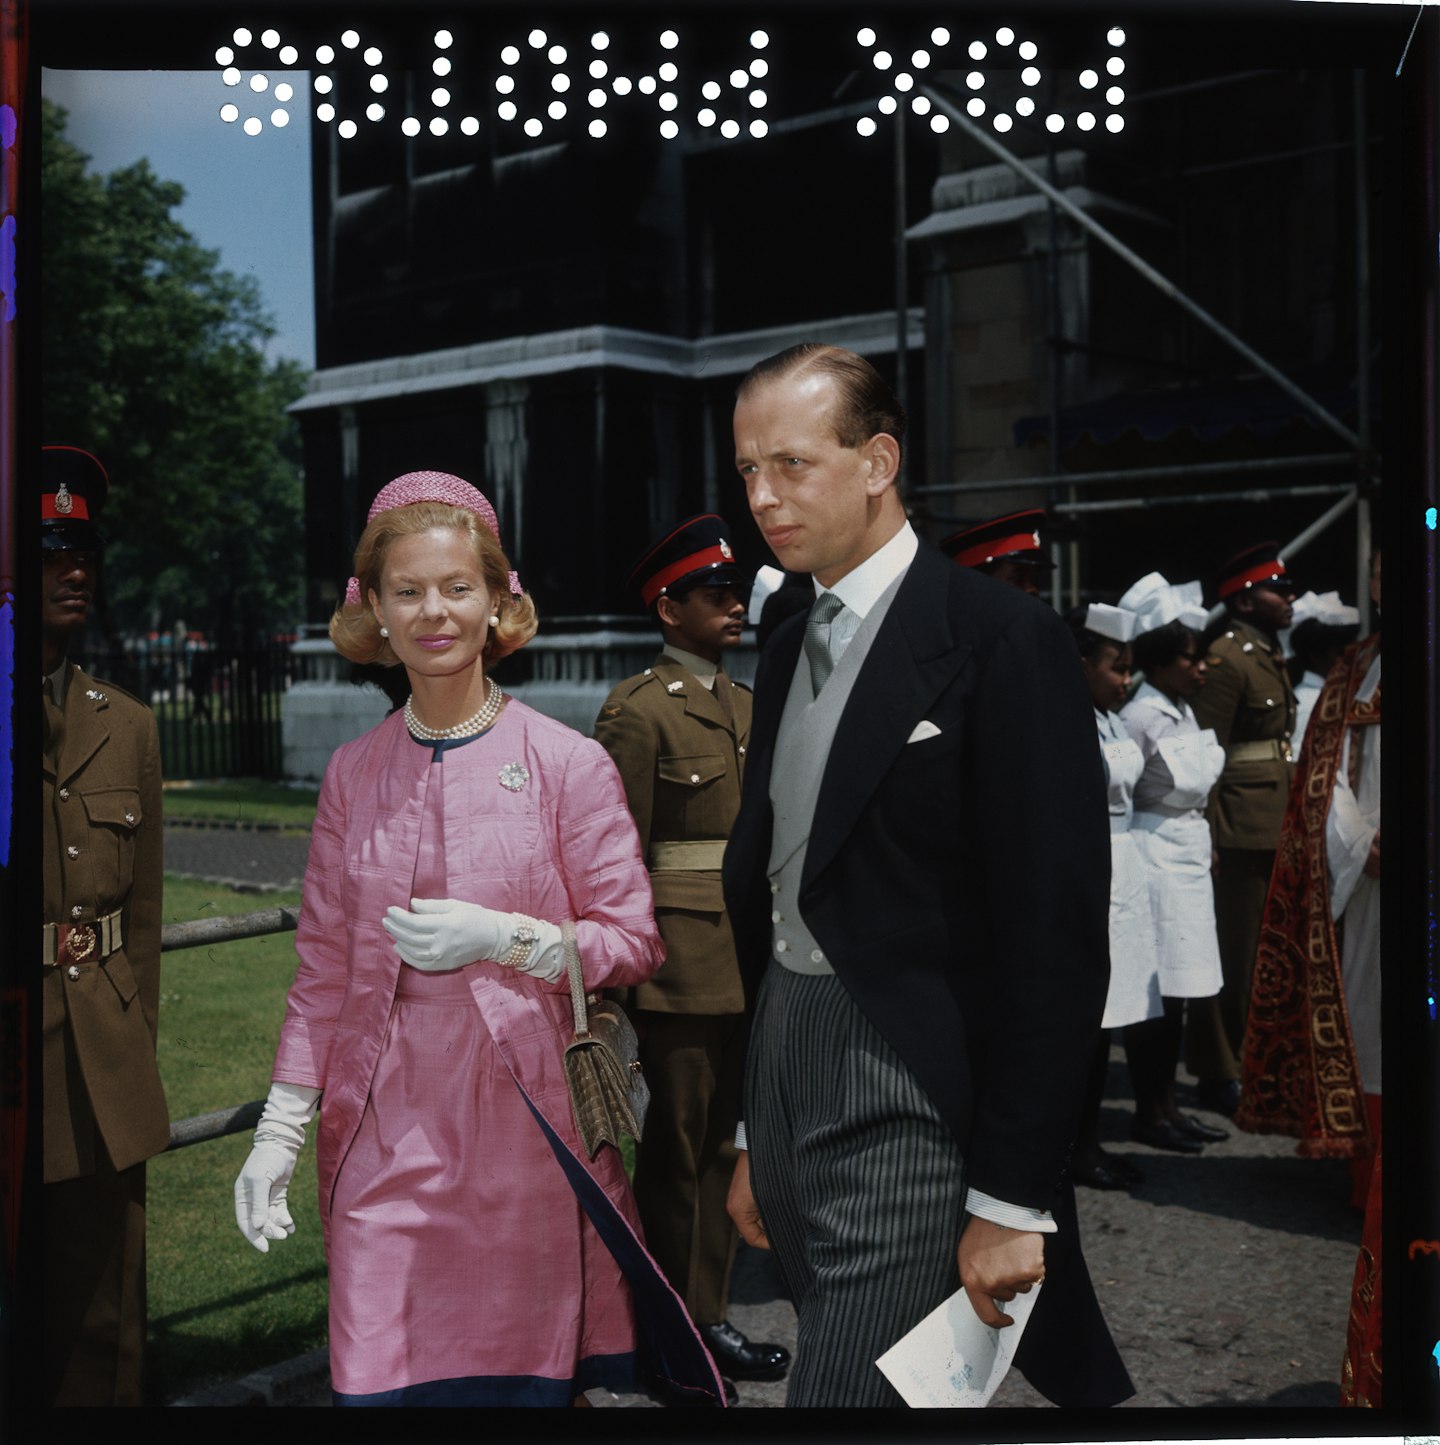 The Duchess of Kent and her husband Prince Edward